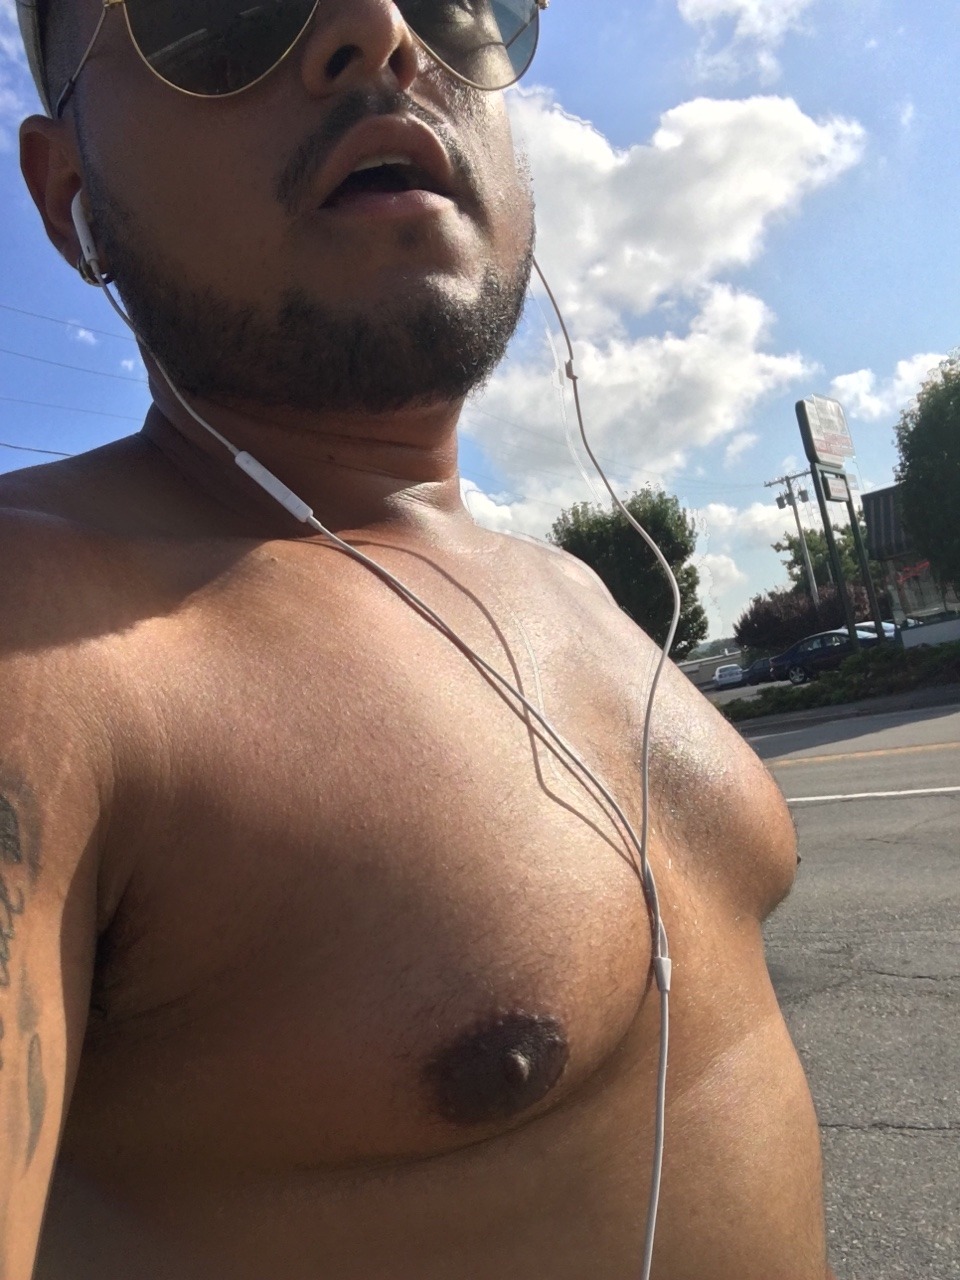 blowurmind3009:  Walked by the mall and a few stores, traffic was running. A few stared at me and my dark chest on the sun, passed by the buss stop. I walked on the street @shirtlesshotasfuck 👅👅👅  Nipple pride 🏳️‍🌈